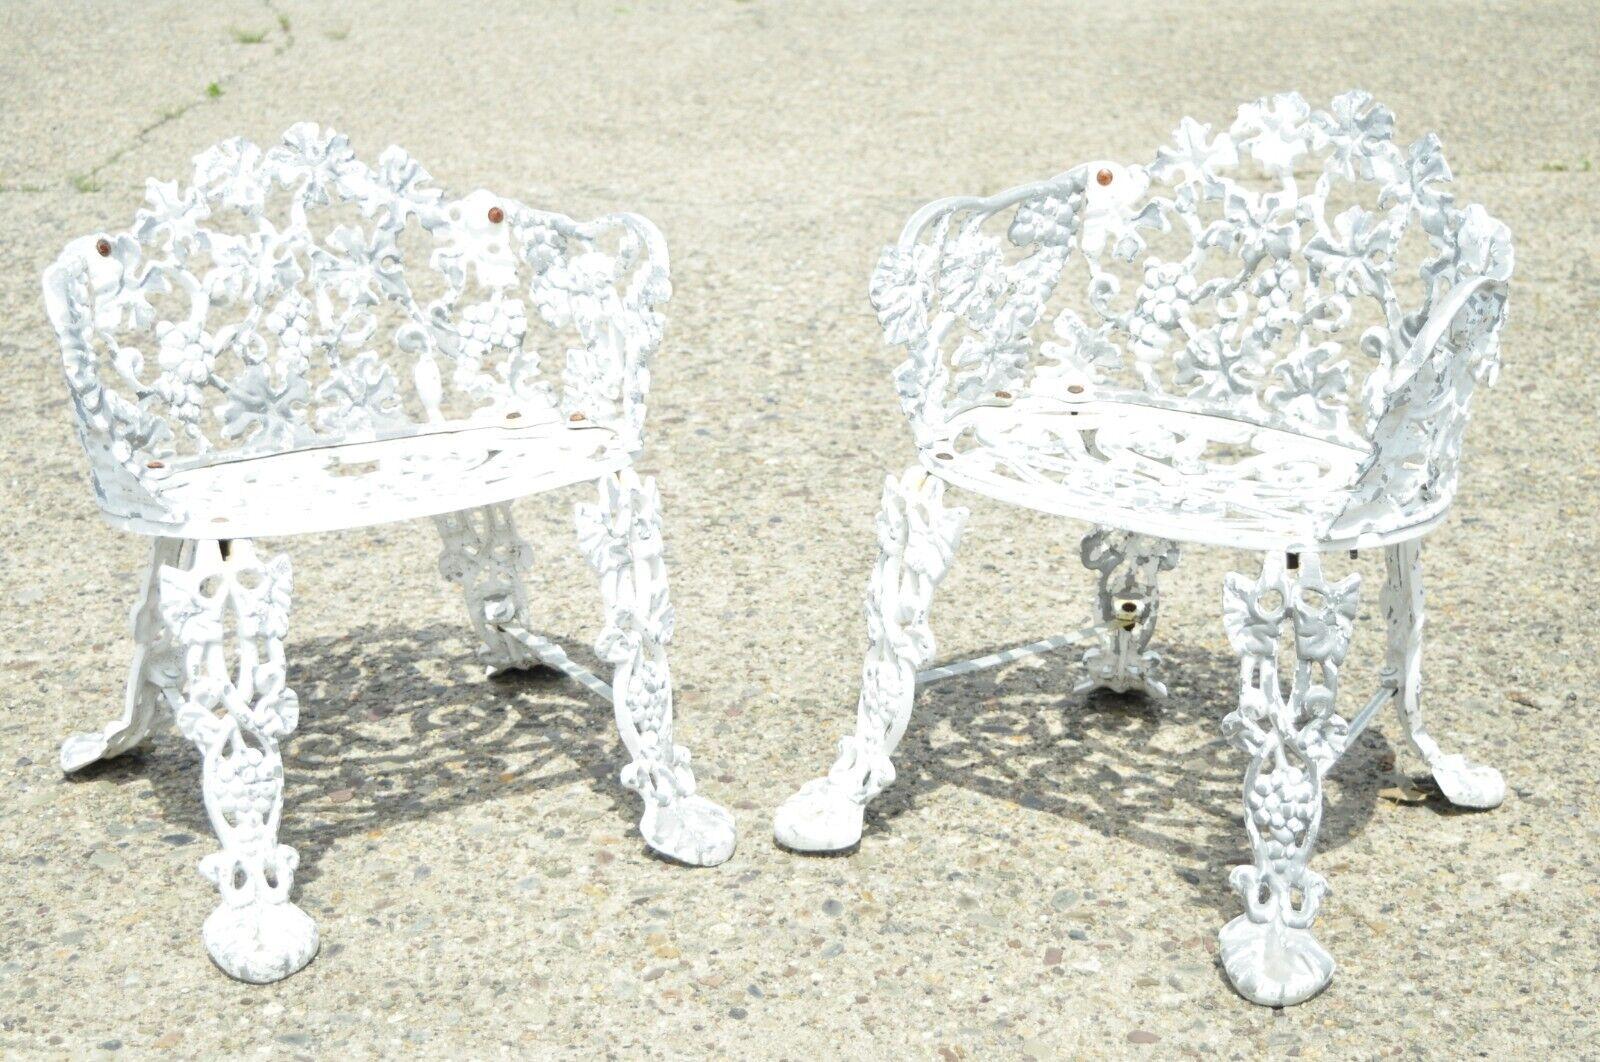 Vintage cast aluminum grape and vine leaf outdoor garden chair set with table. Item features (2) small armchairs, (1) small round side table, cast aluminum construction, grape and vine leaf pattern, white painted weathered finish, very nice vintage